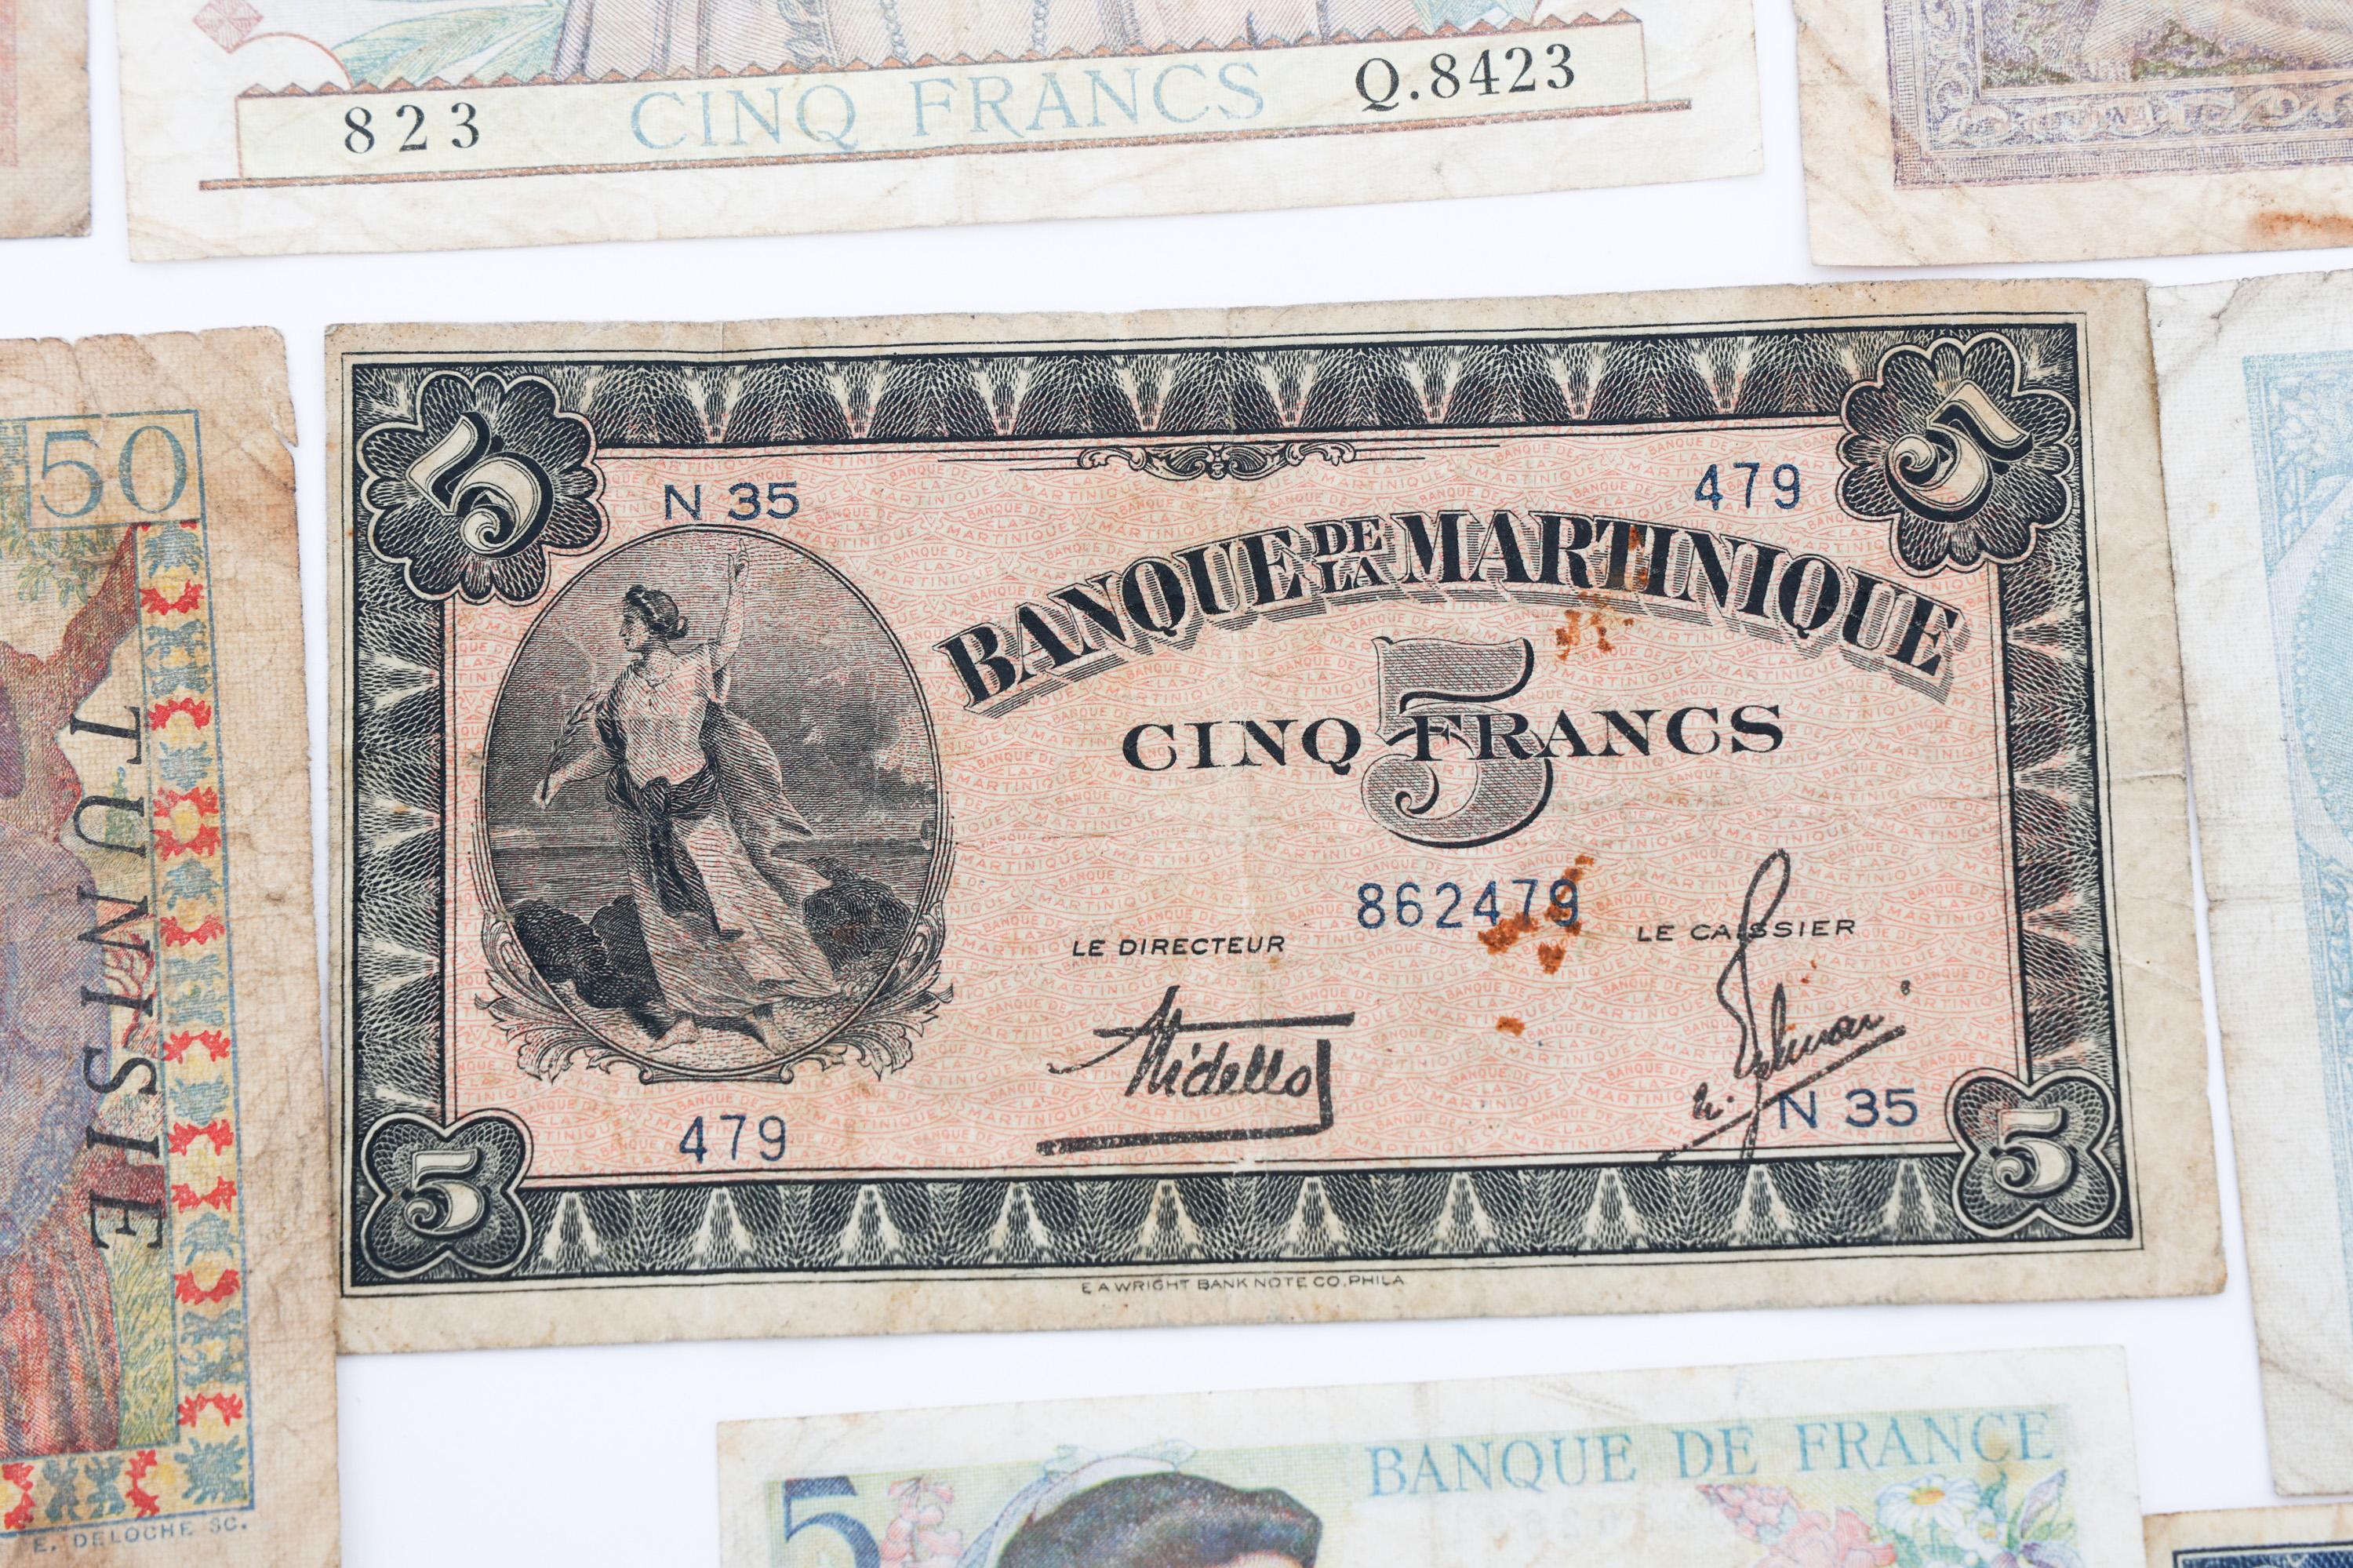 WWI - WWII FRENCH CURRENCY, POST CARD, & CALENDAR